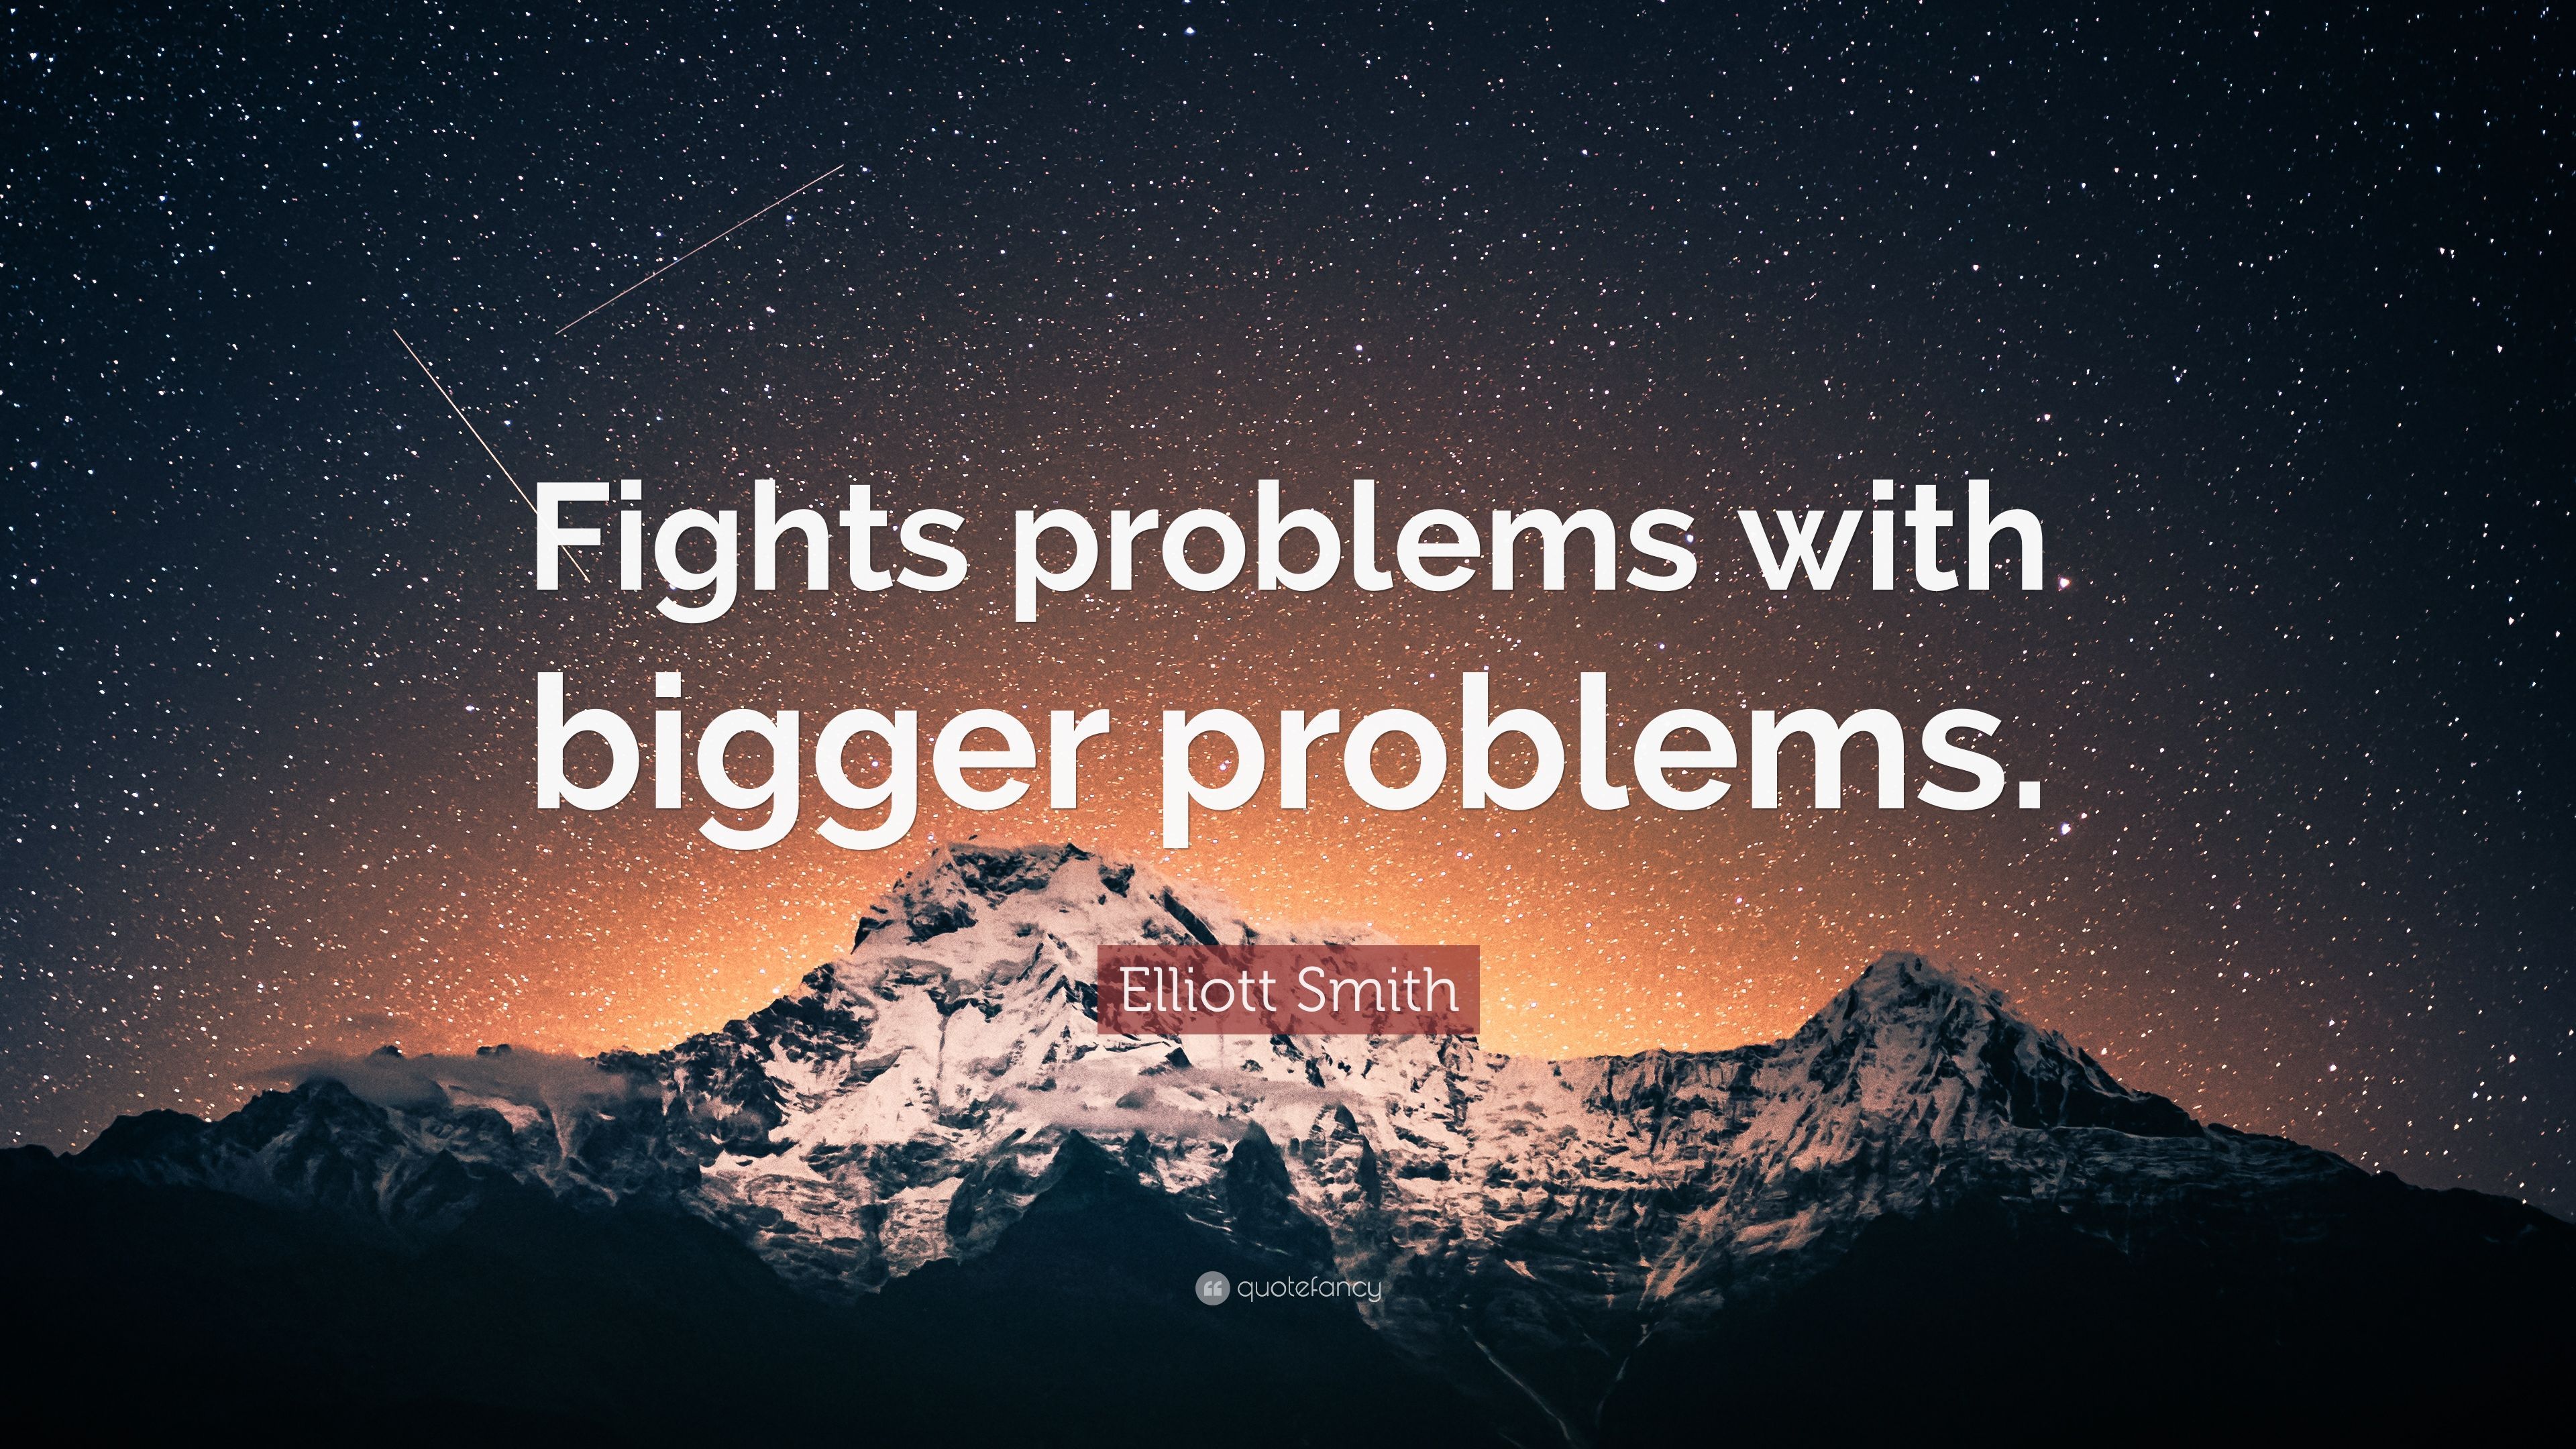 Elliott Smith Quote: “Fights problems with bigger problems.” (7 wallpaper)